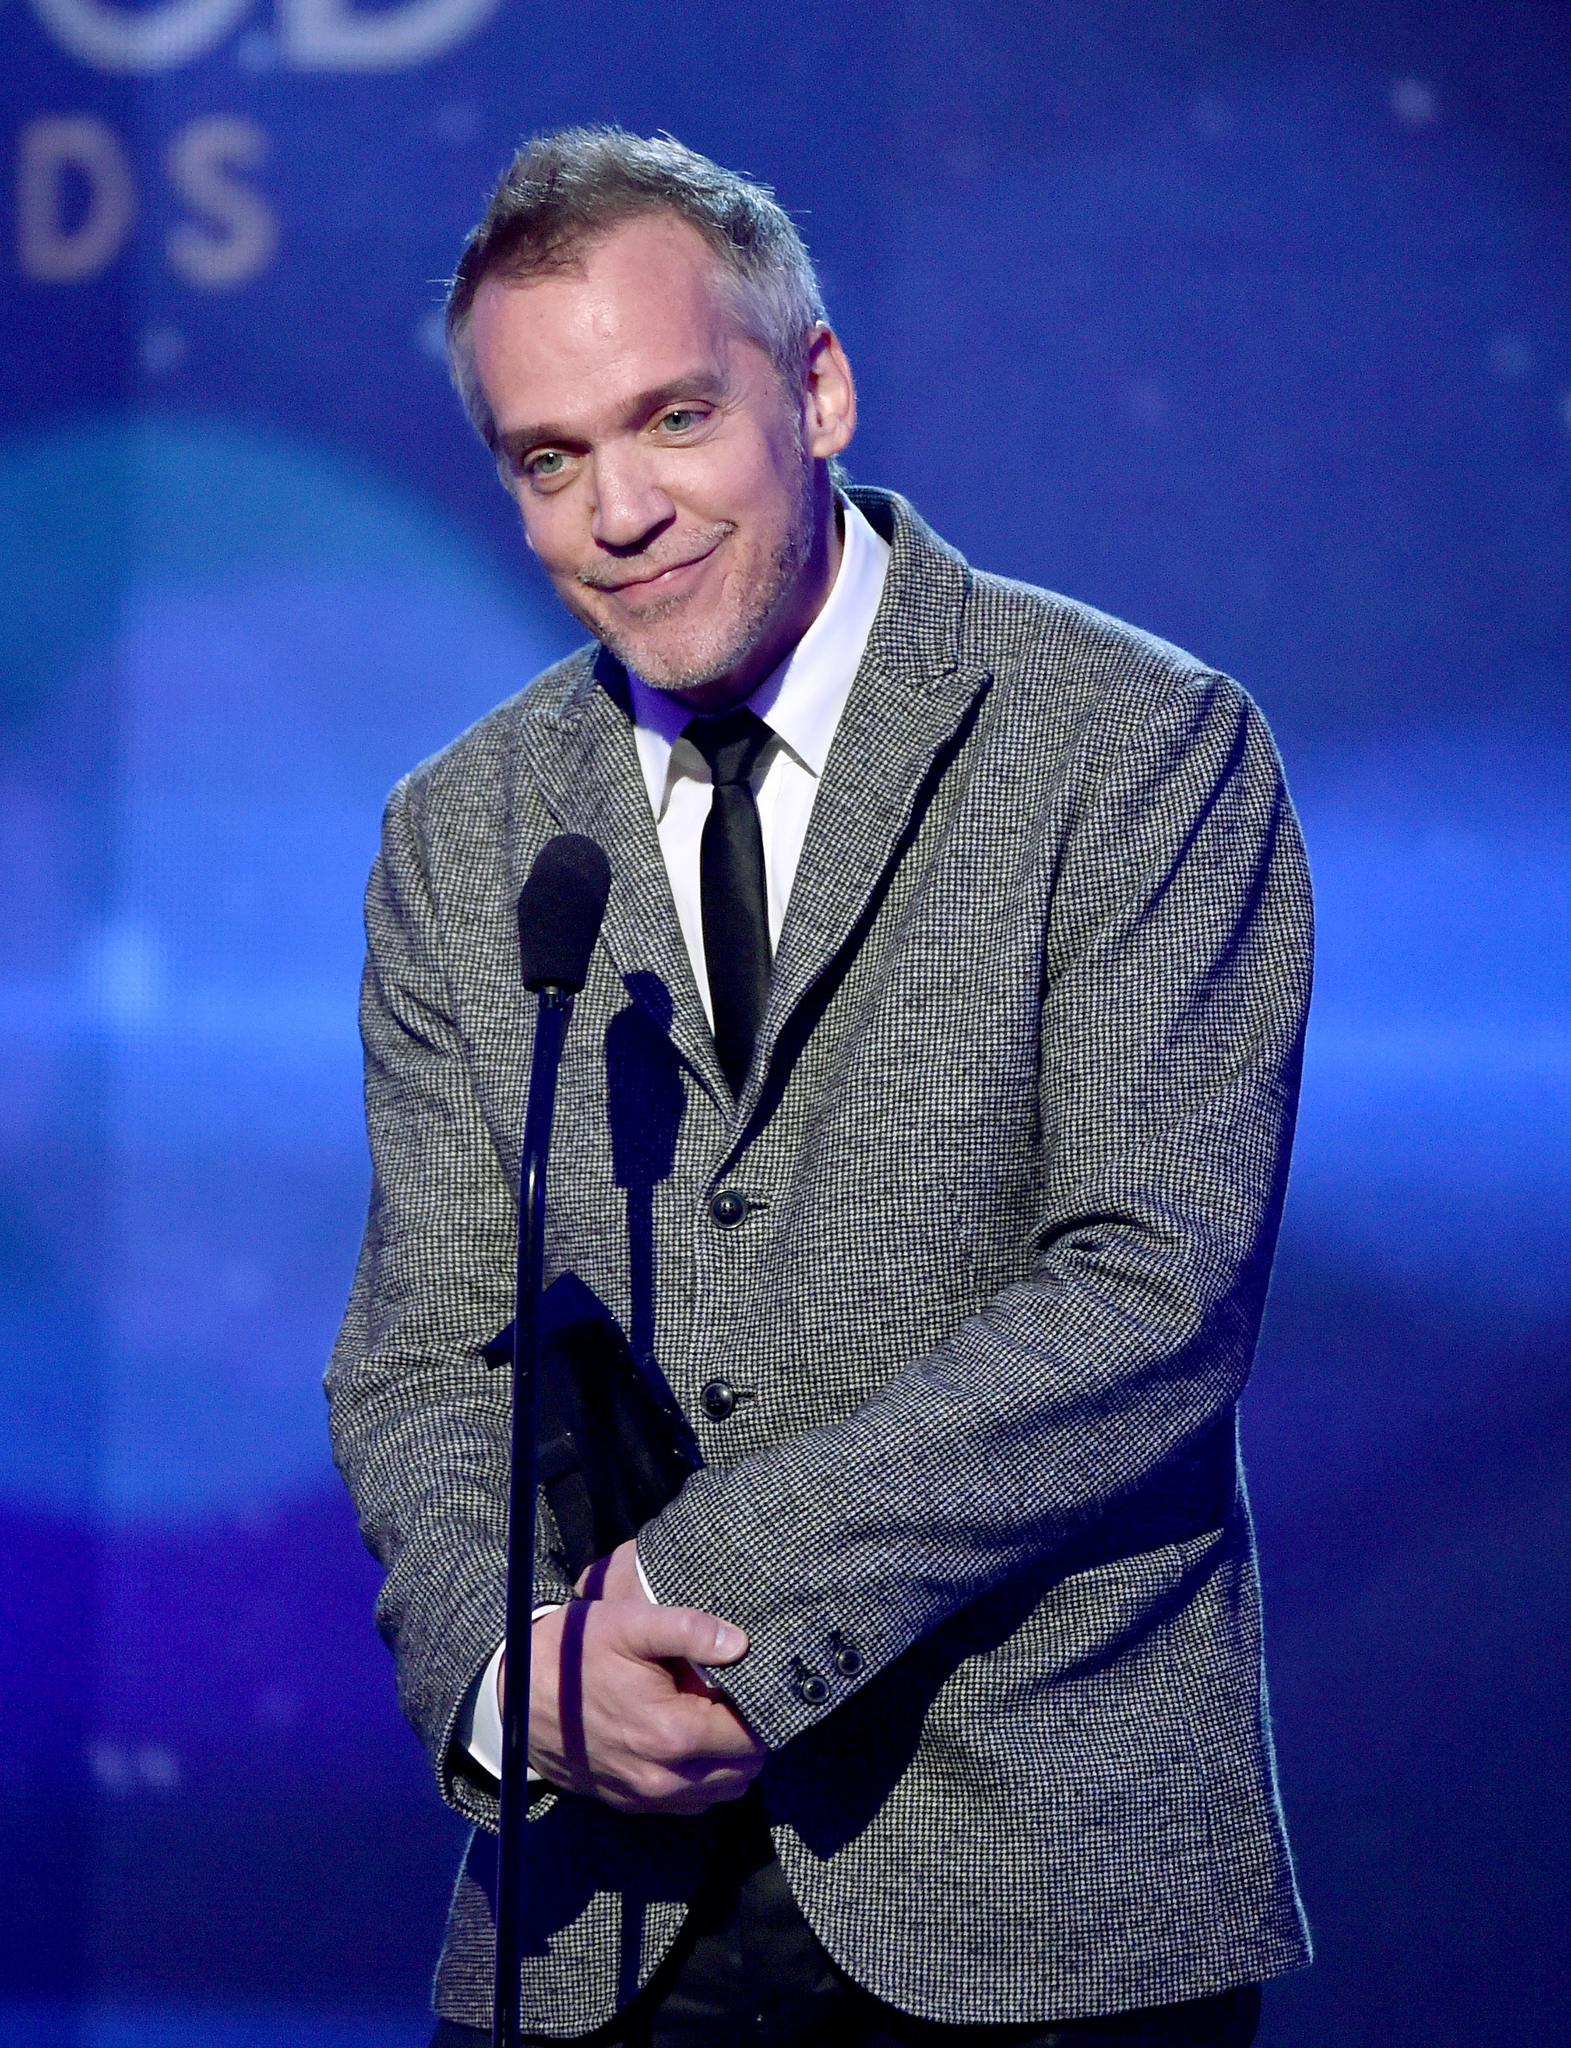 Jean-Marc Vallée at event of Hollywood Film Awards (2014)